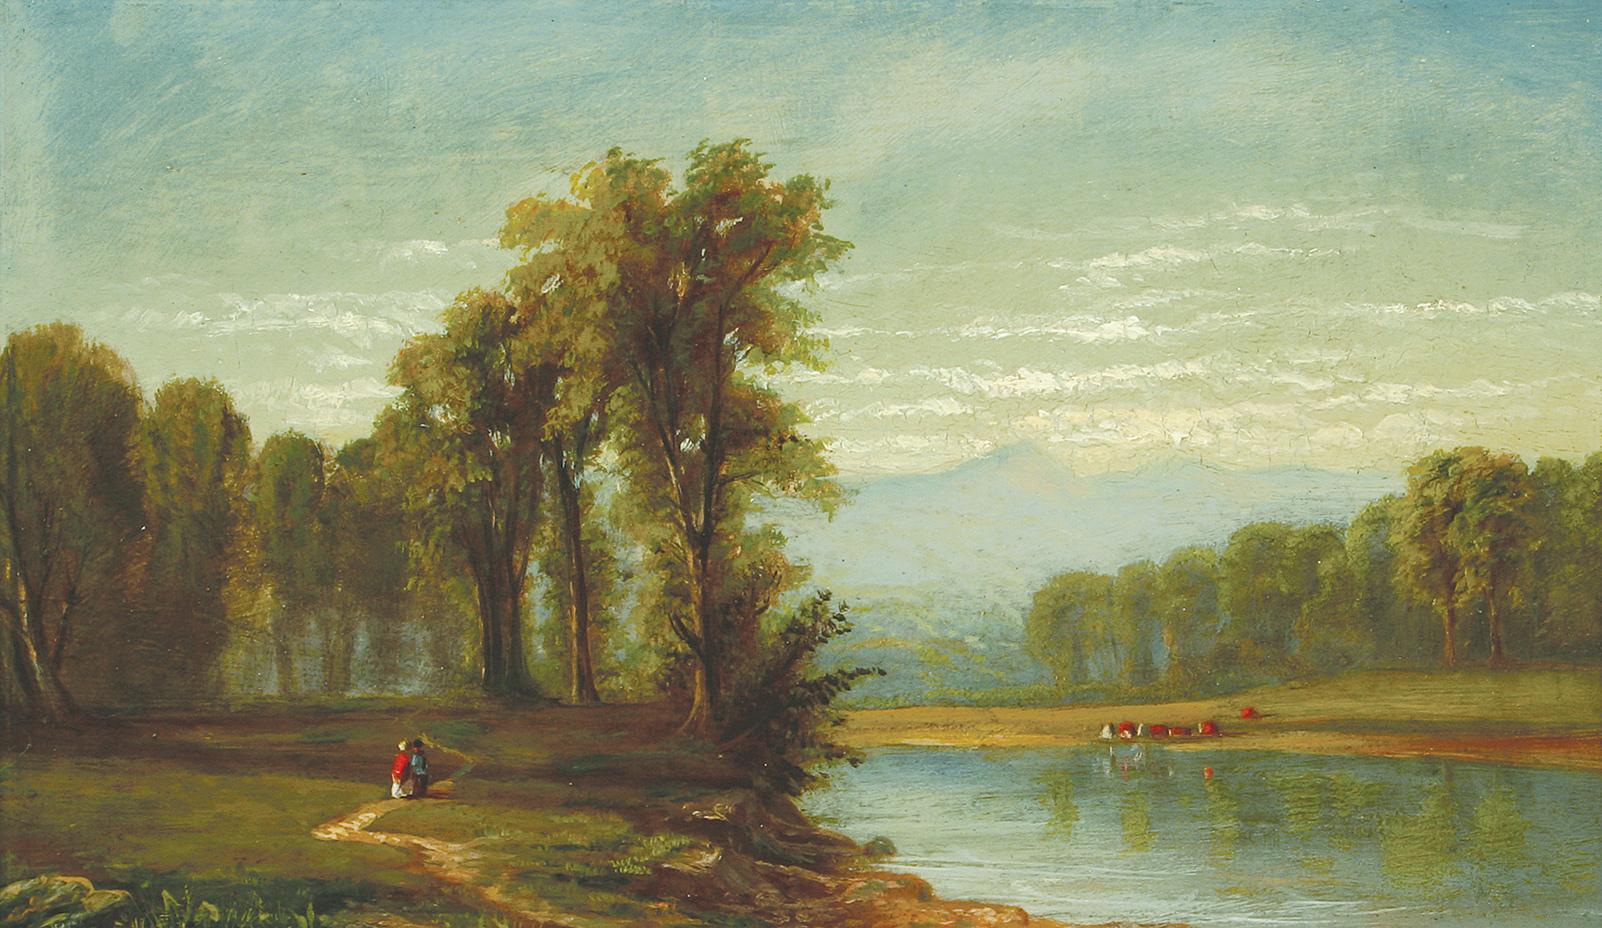 View on the Schuylkill River, Philadelphia - Painting by William Henry Lippincott